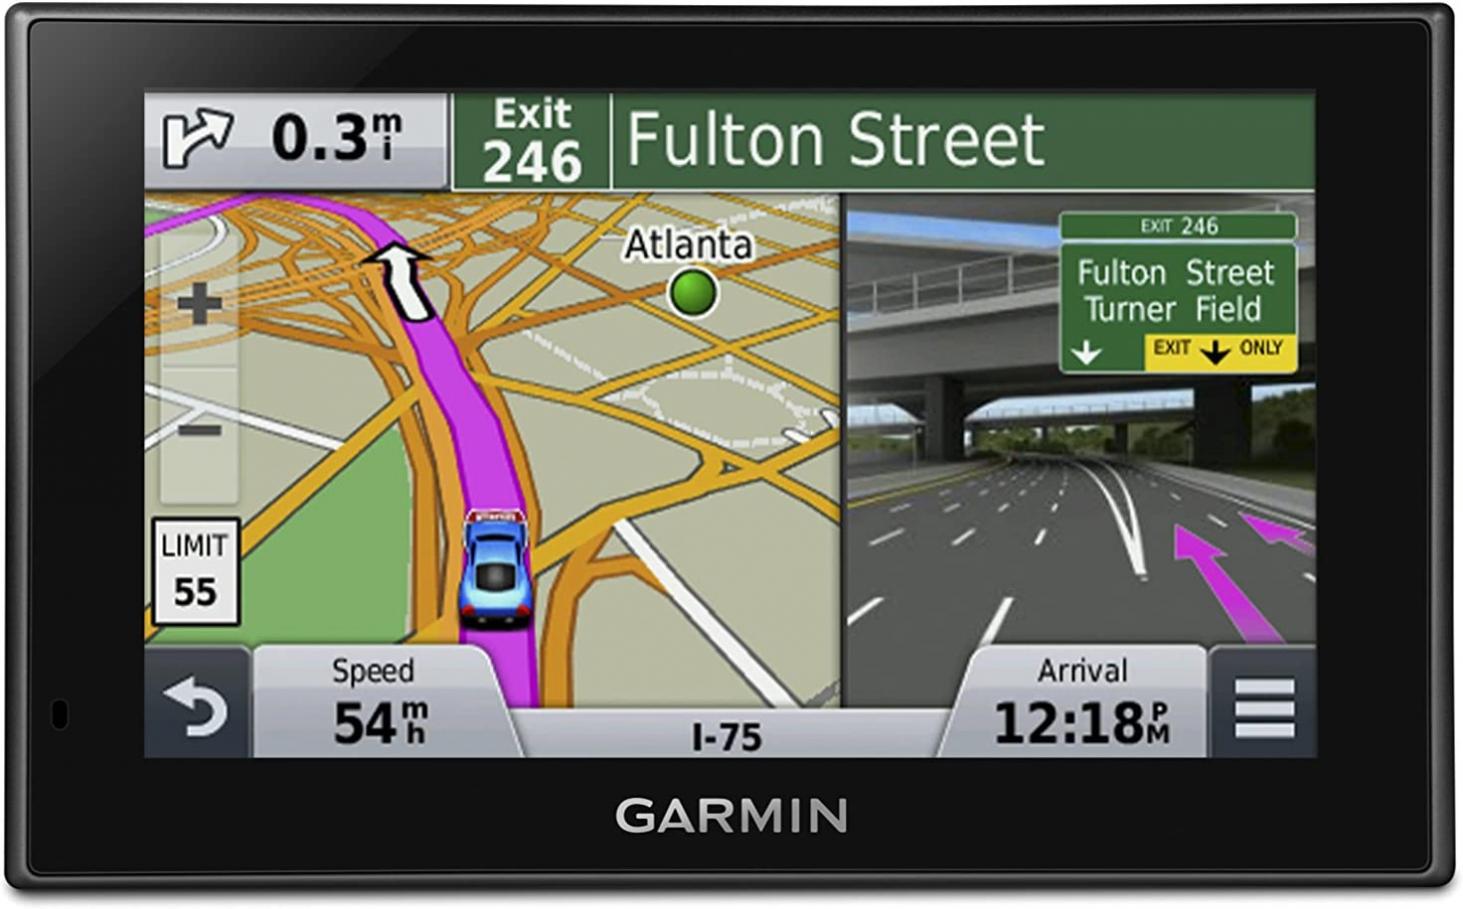 Garmin Nuvi 2539LMT GPS Navigator with Spoken Turn-By-Turn Directions, Lifetime Map Updates, Speed Limit Display, Traffic Updates, and Lane Guidance